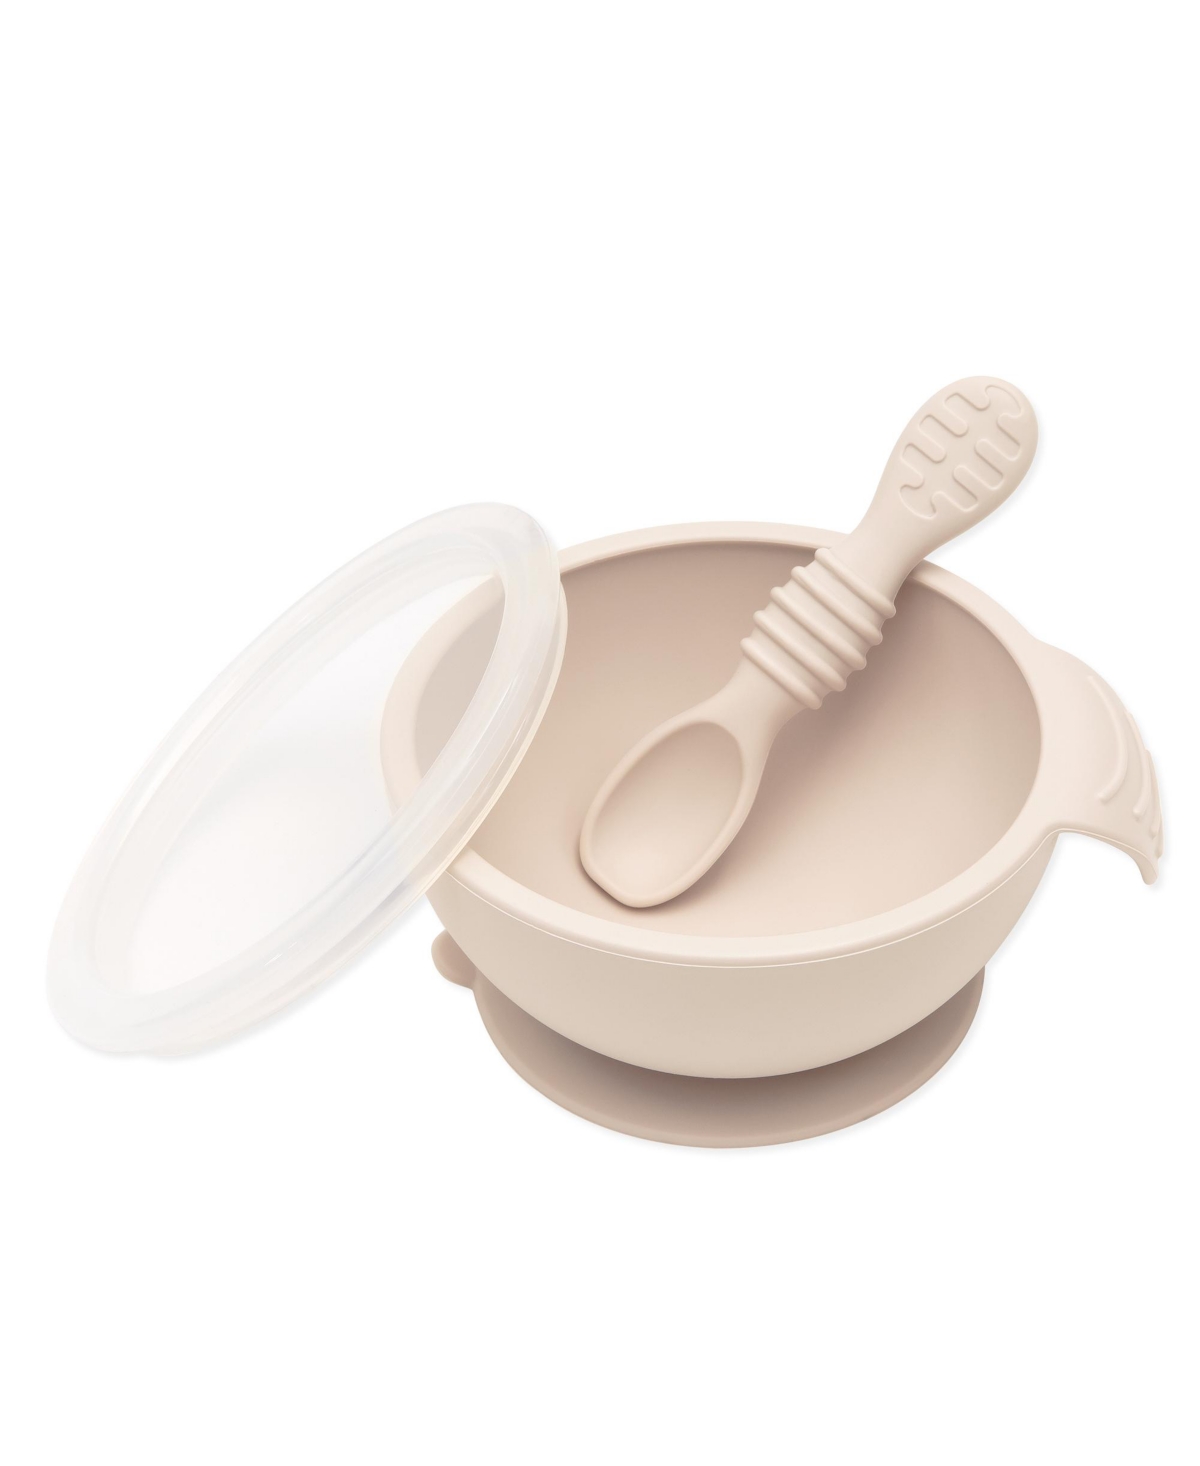 Bumkins Silicone First Feeding Baby Bowl Set In Sand